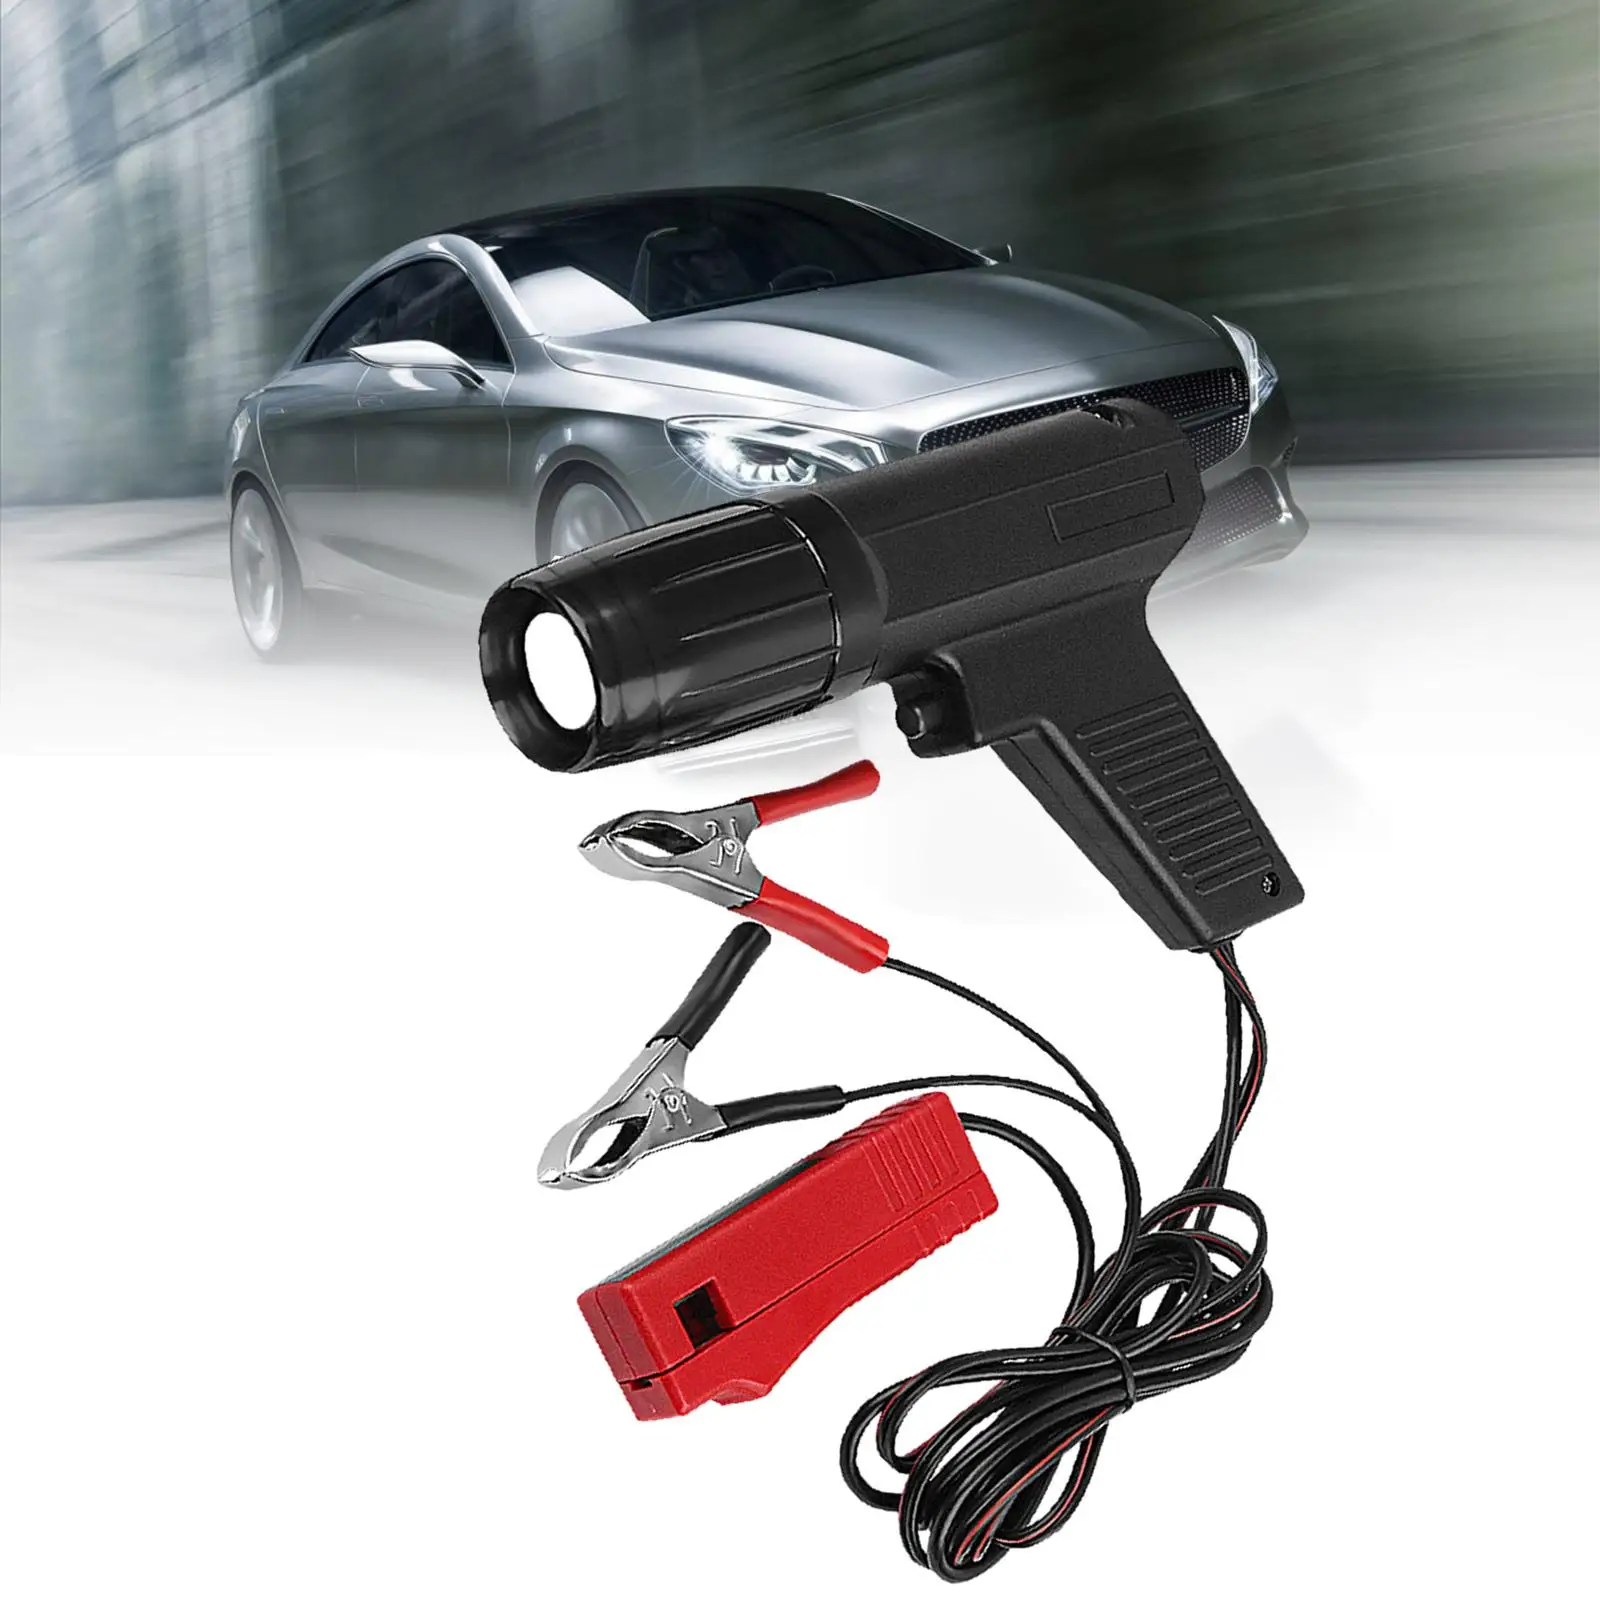 Ignition Light Professional Vehicle Inductive Replacement Easy Installation